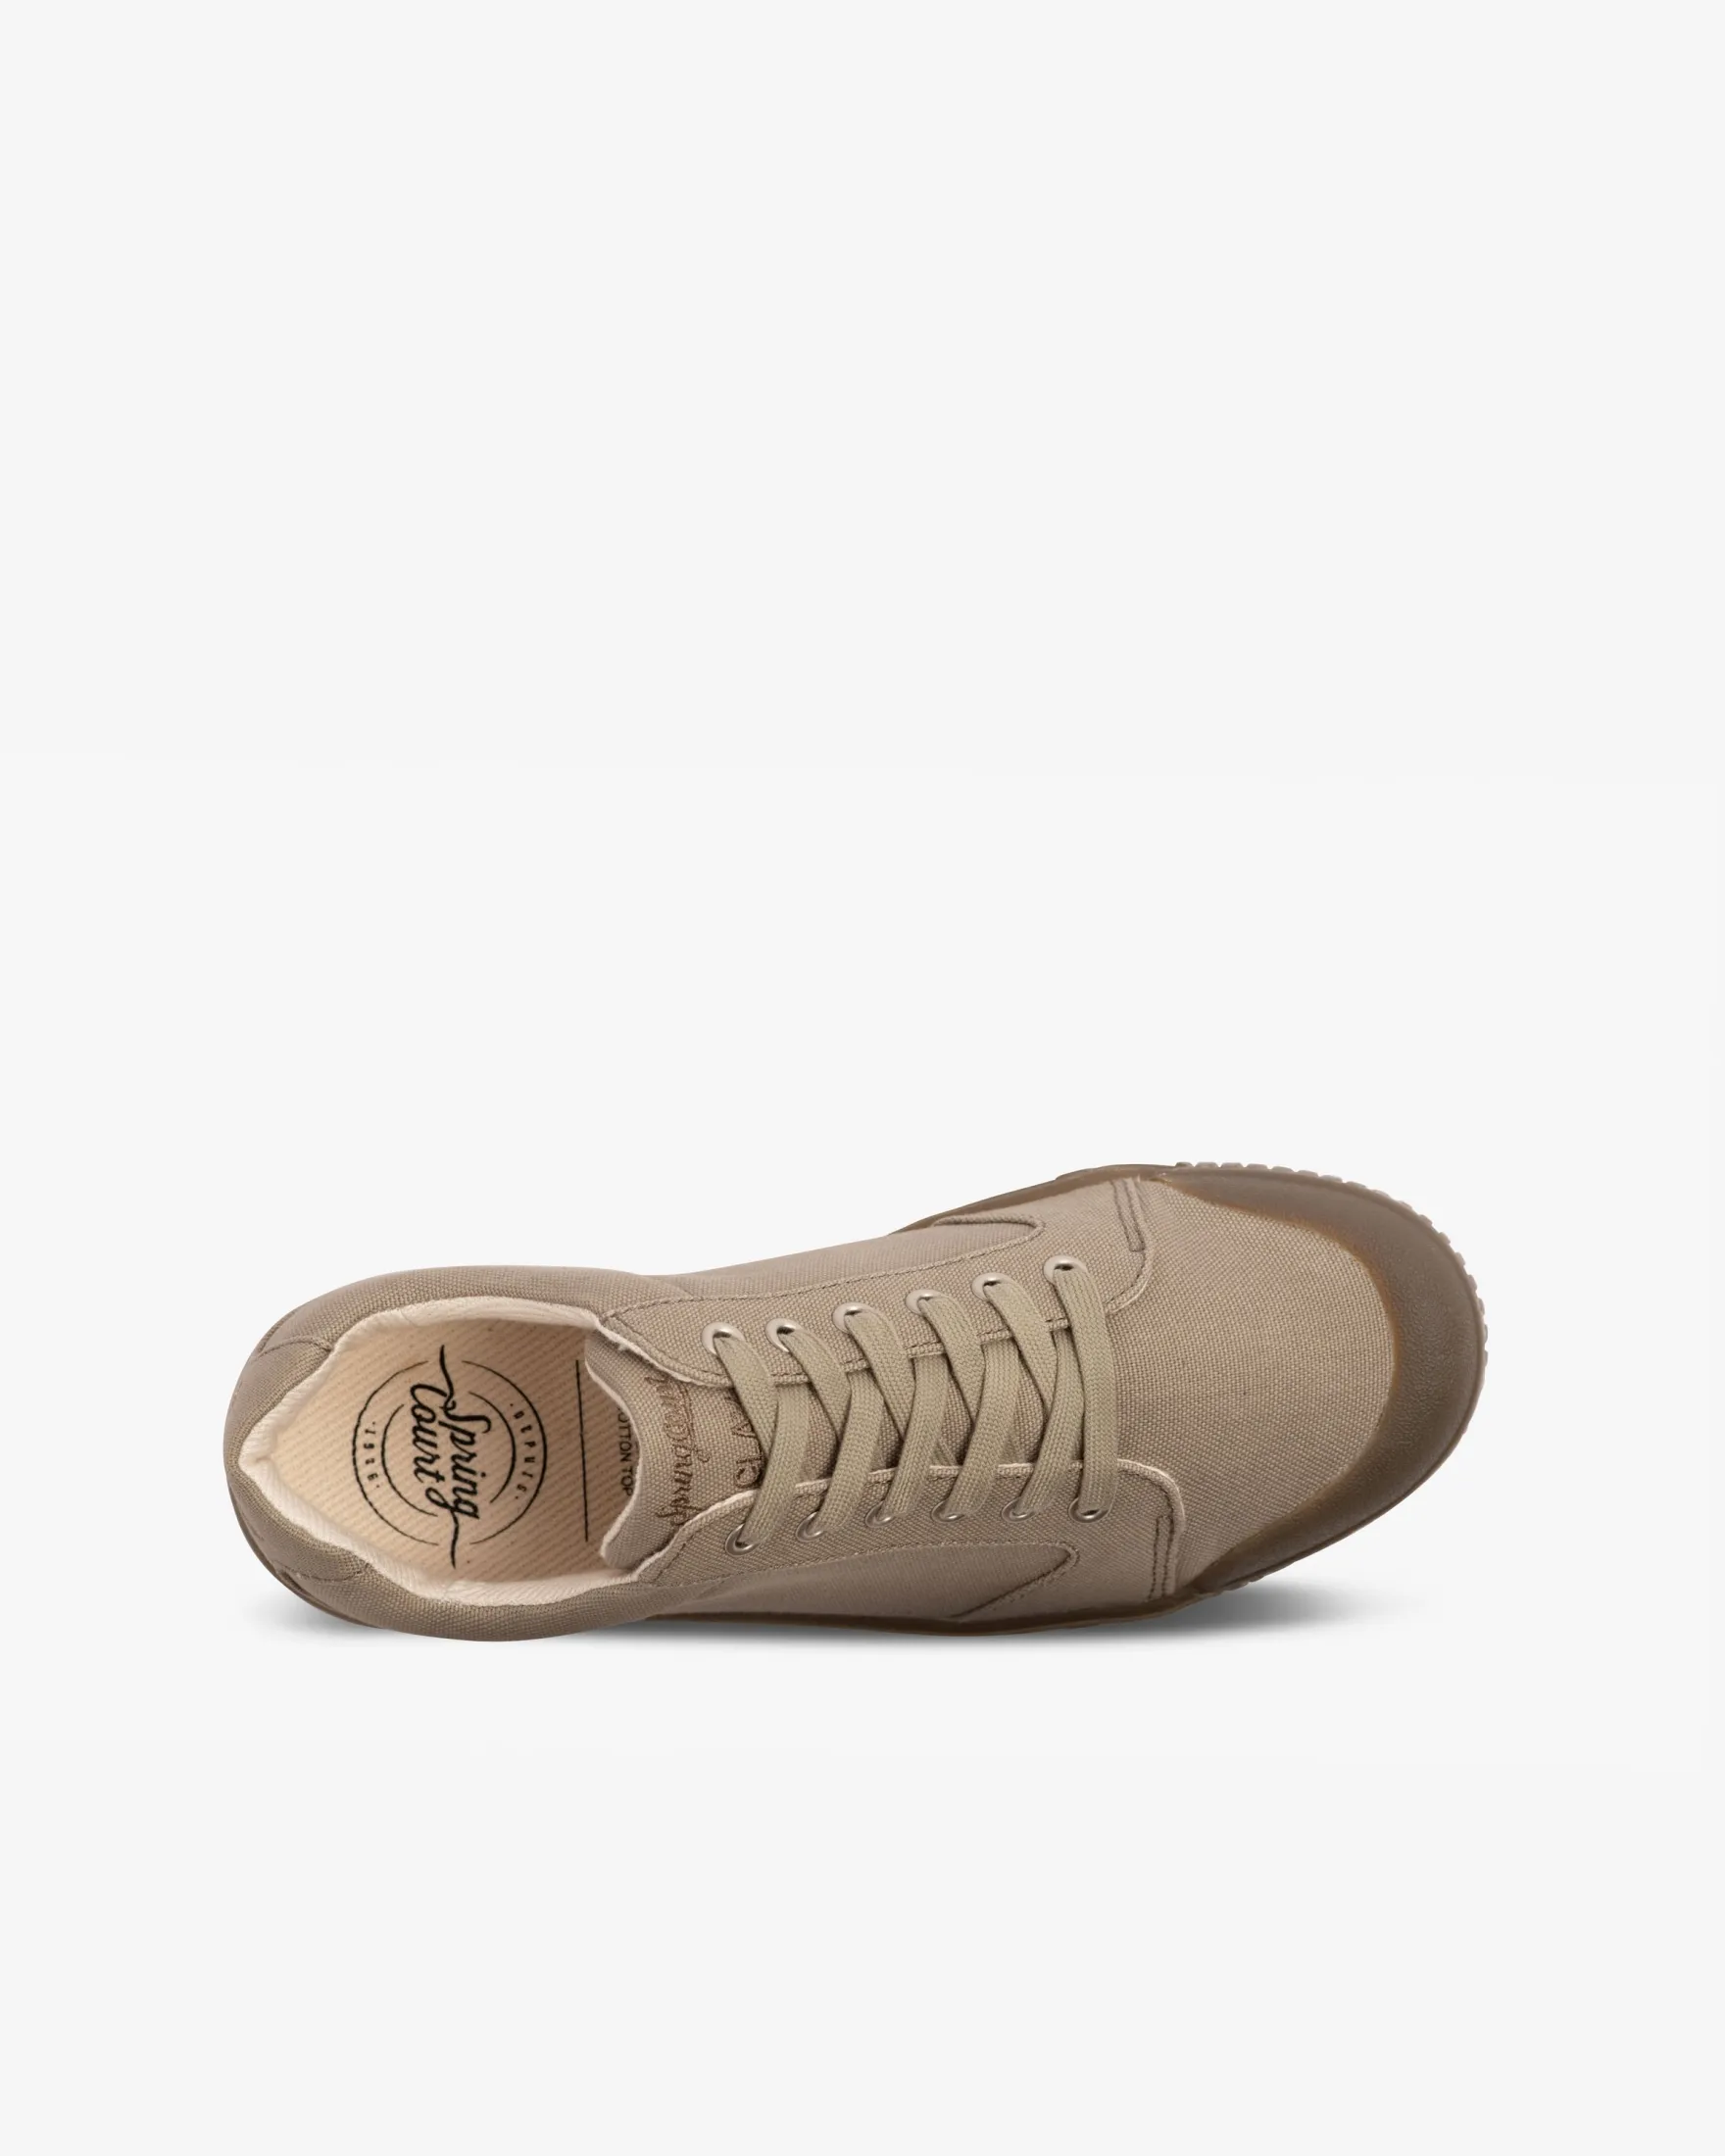 Khaki canvas low top trainers